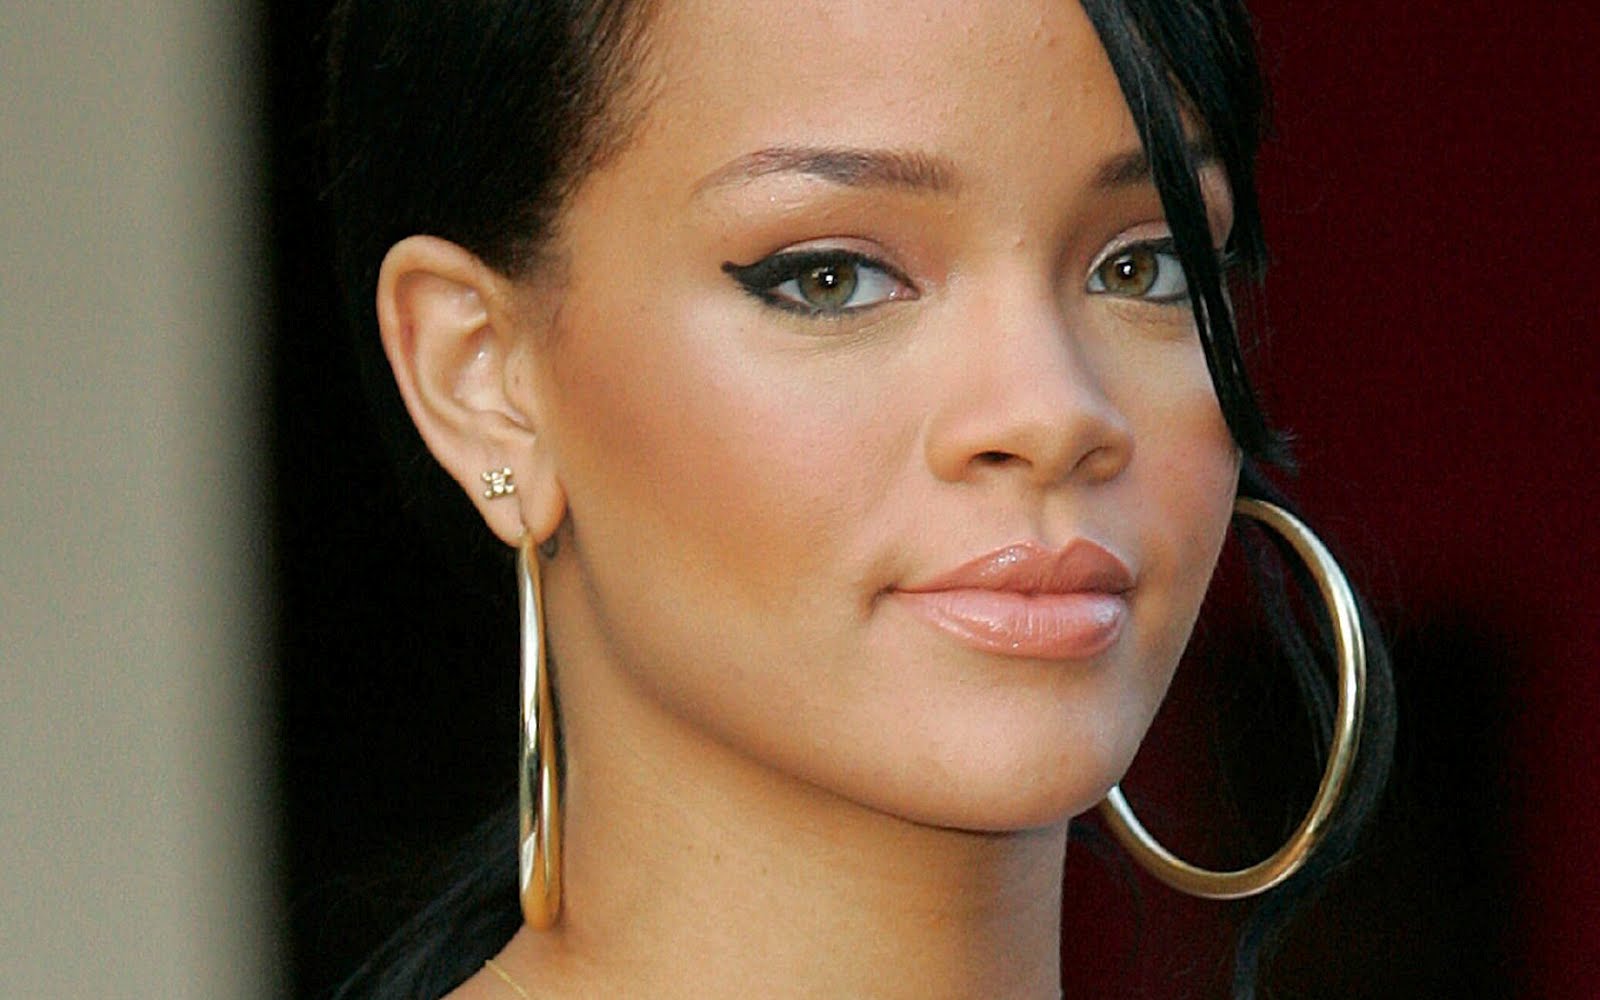 Hairstyle Name: Rihanna Hairstyles Pictures